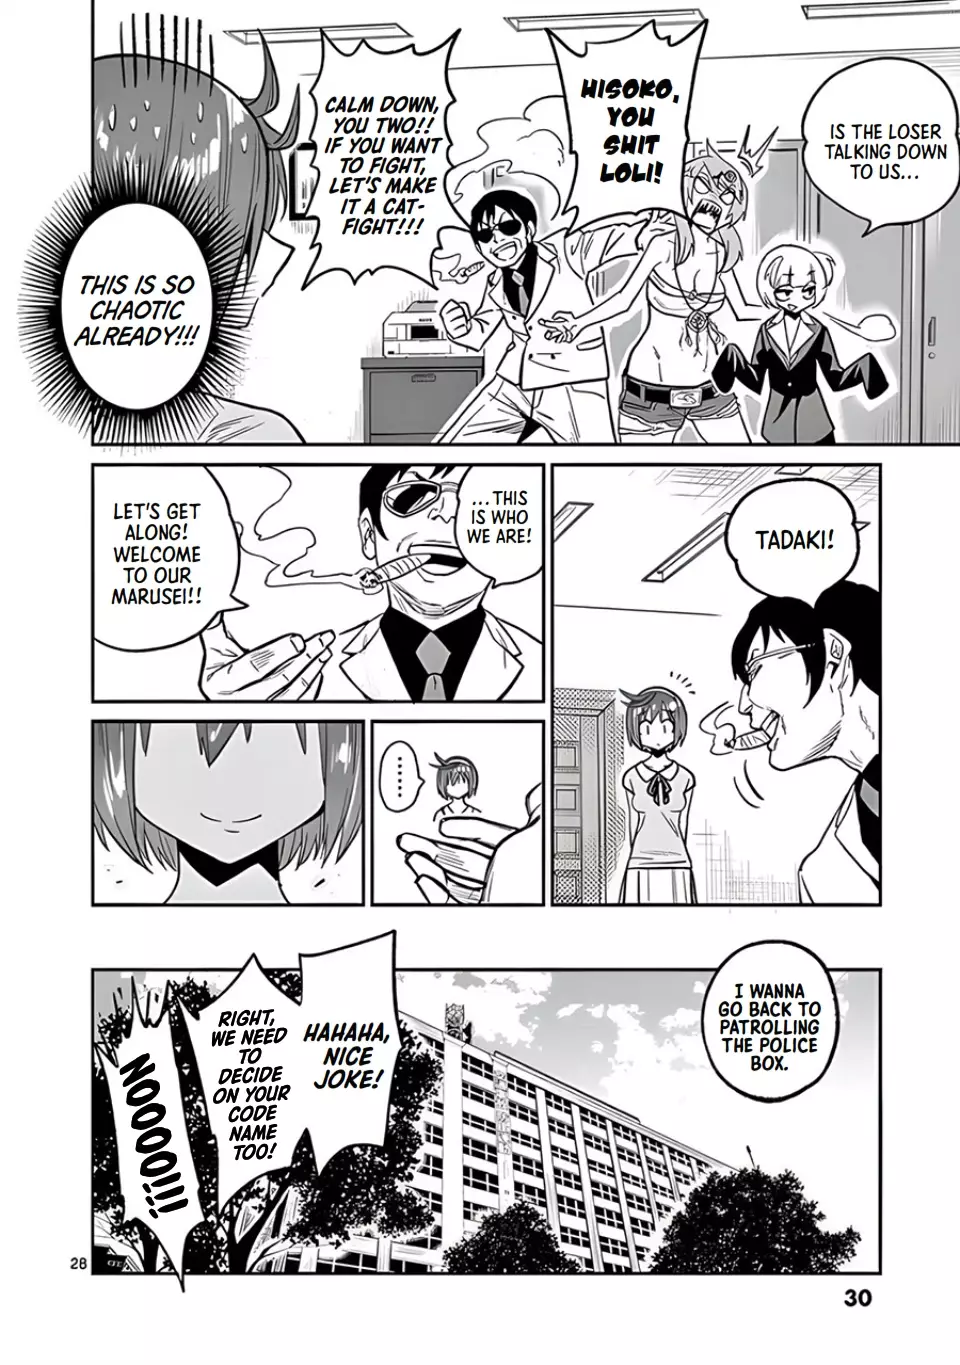 Marusei!! - 1 page 27-be9a3dc5